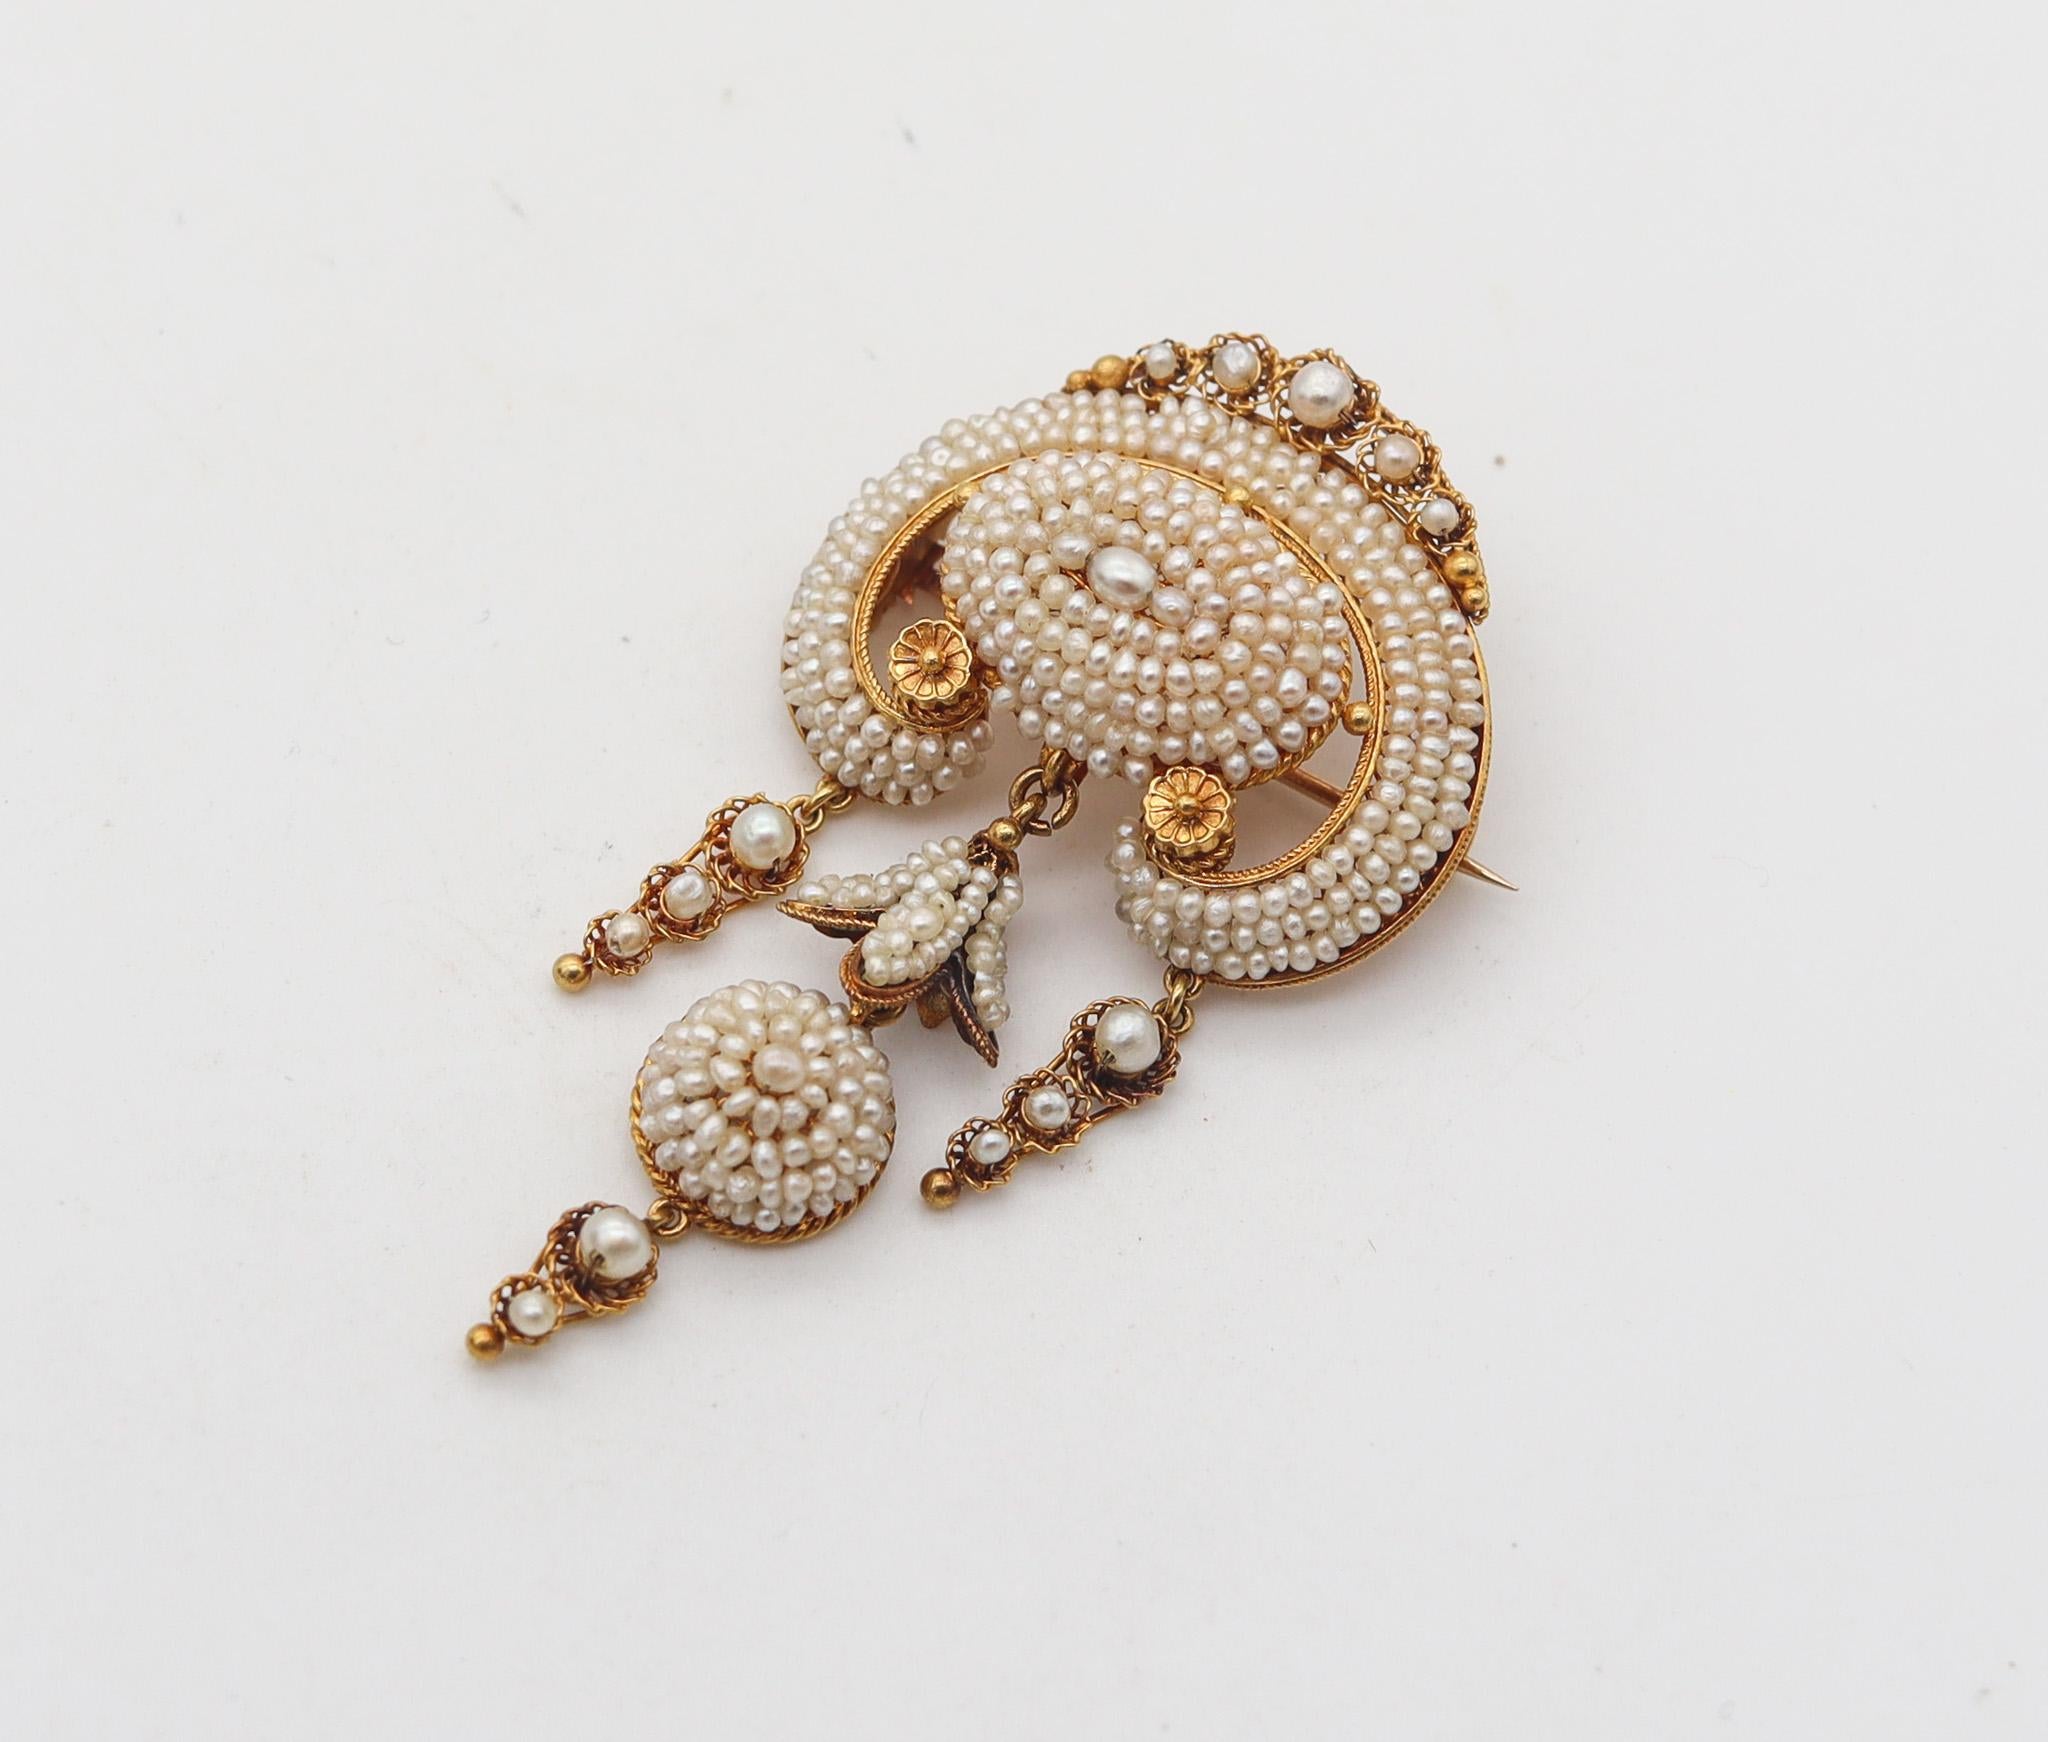 Magnificent Portuguese Iberian Brooch. 

Beautiful and very unusual antique Iberian brooch, created in Portugal during the Victorian era, back in the 1850 or most probably earlier. It was crafted with the difficult filigree technique in solid yellow